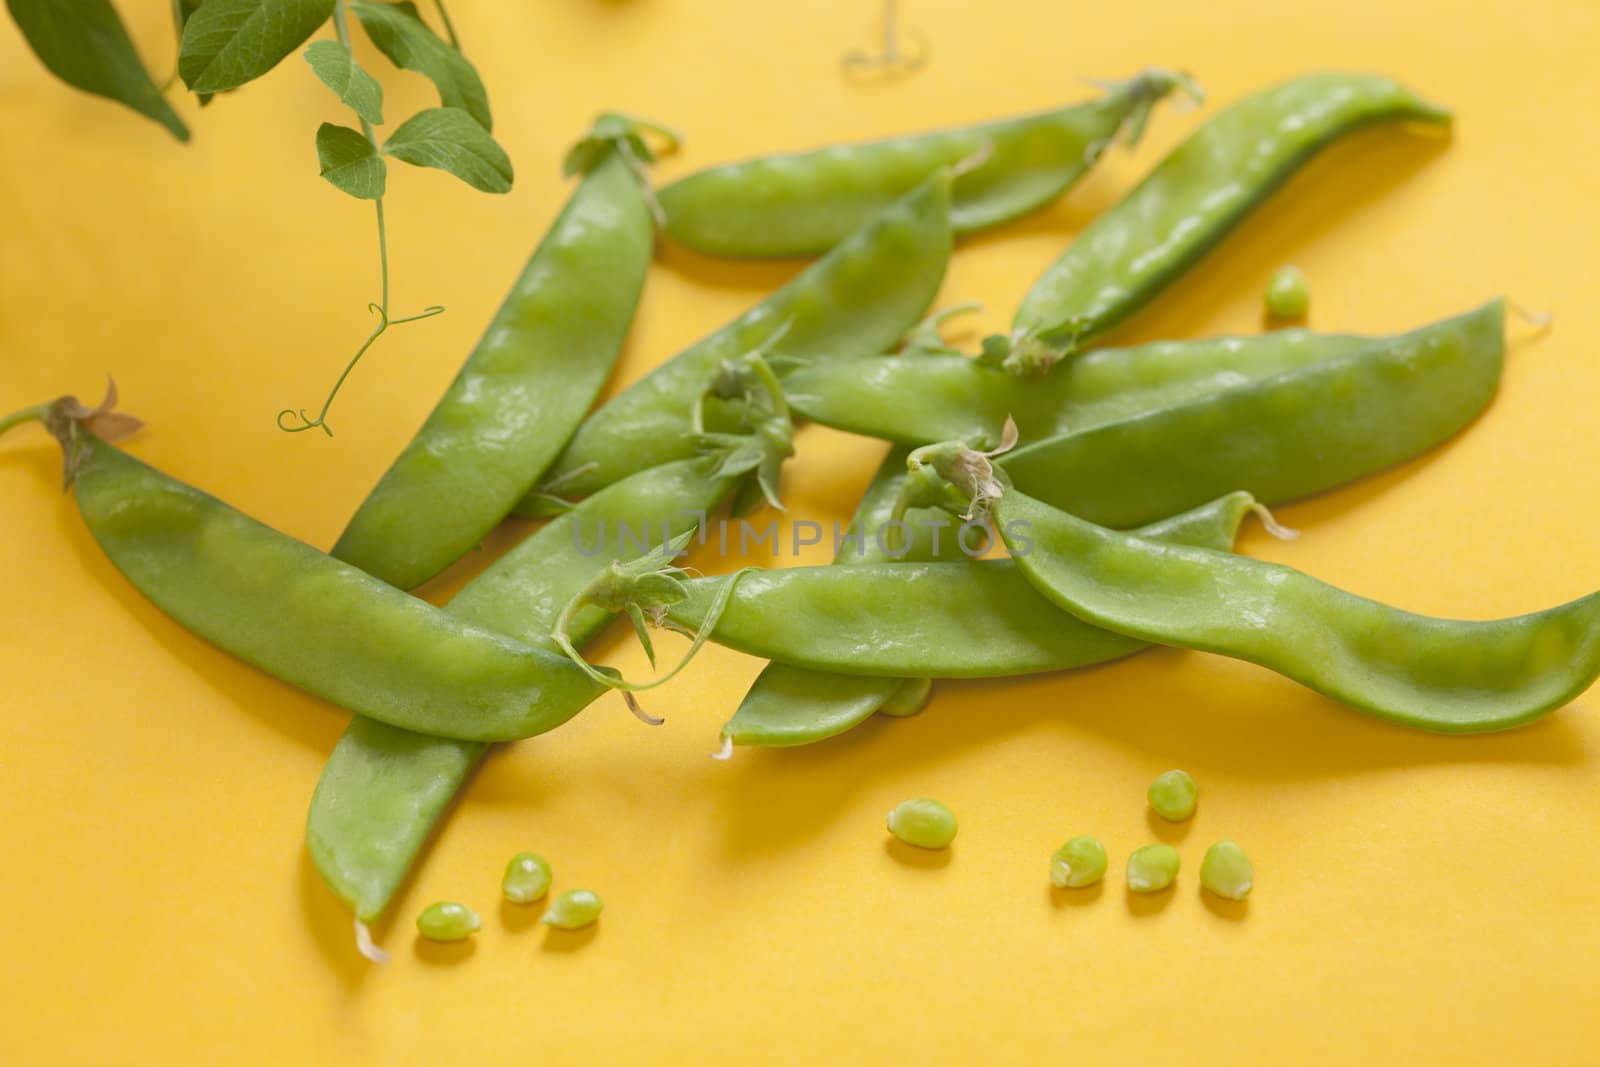 Snow Peas on Yellow Background by biitli